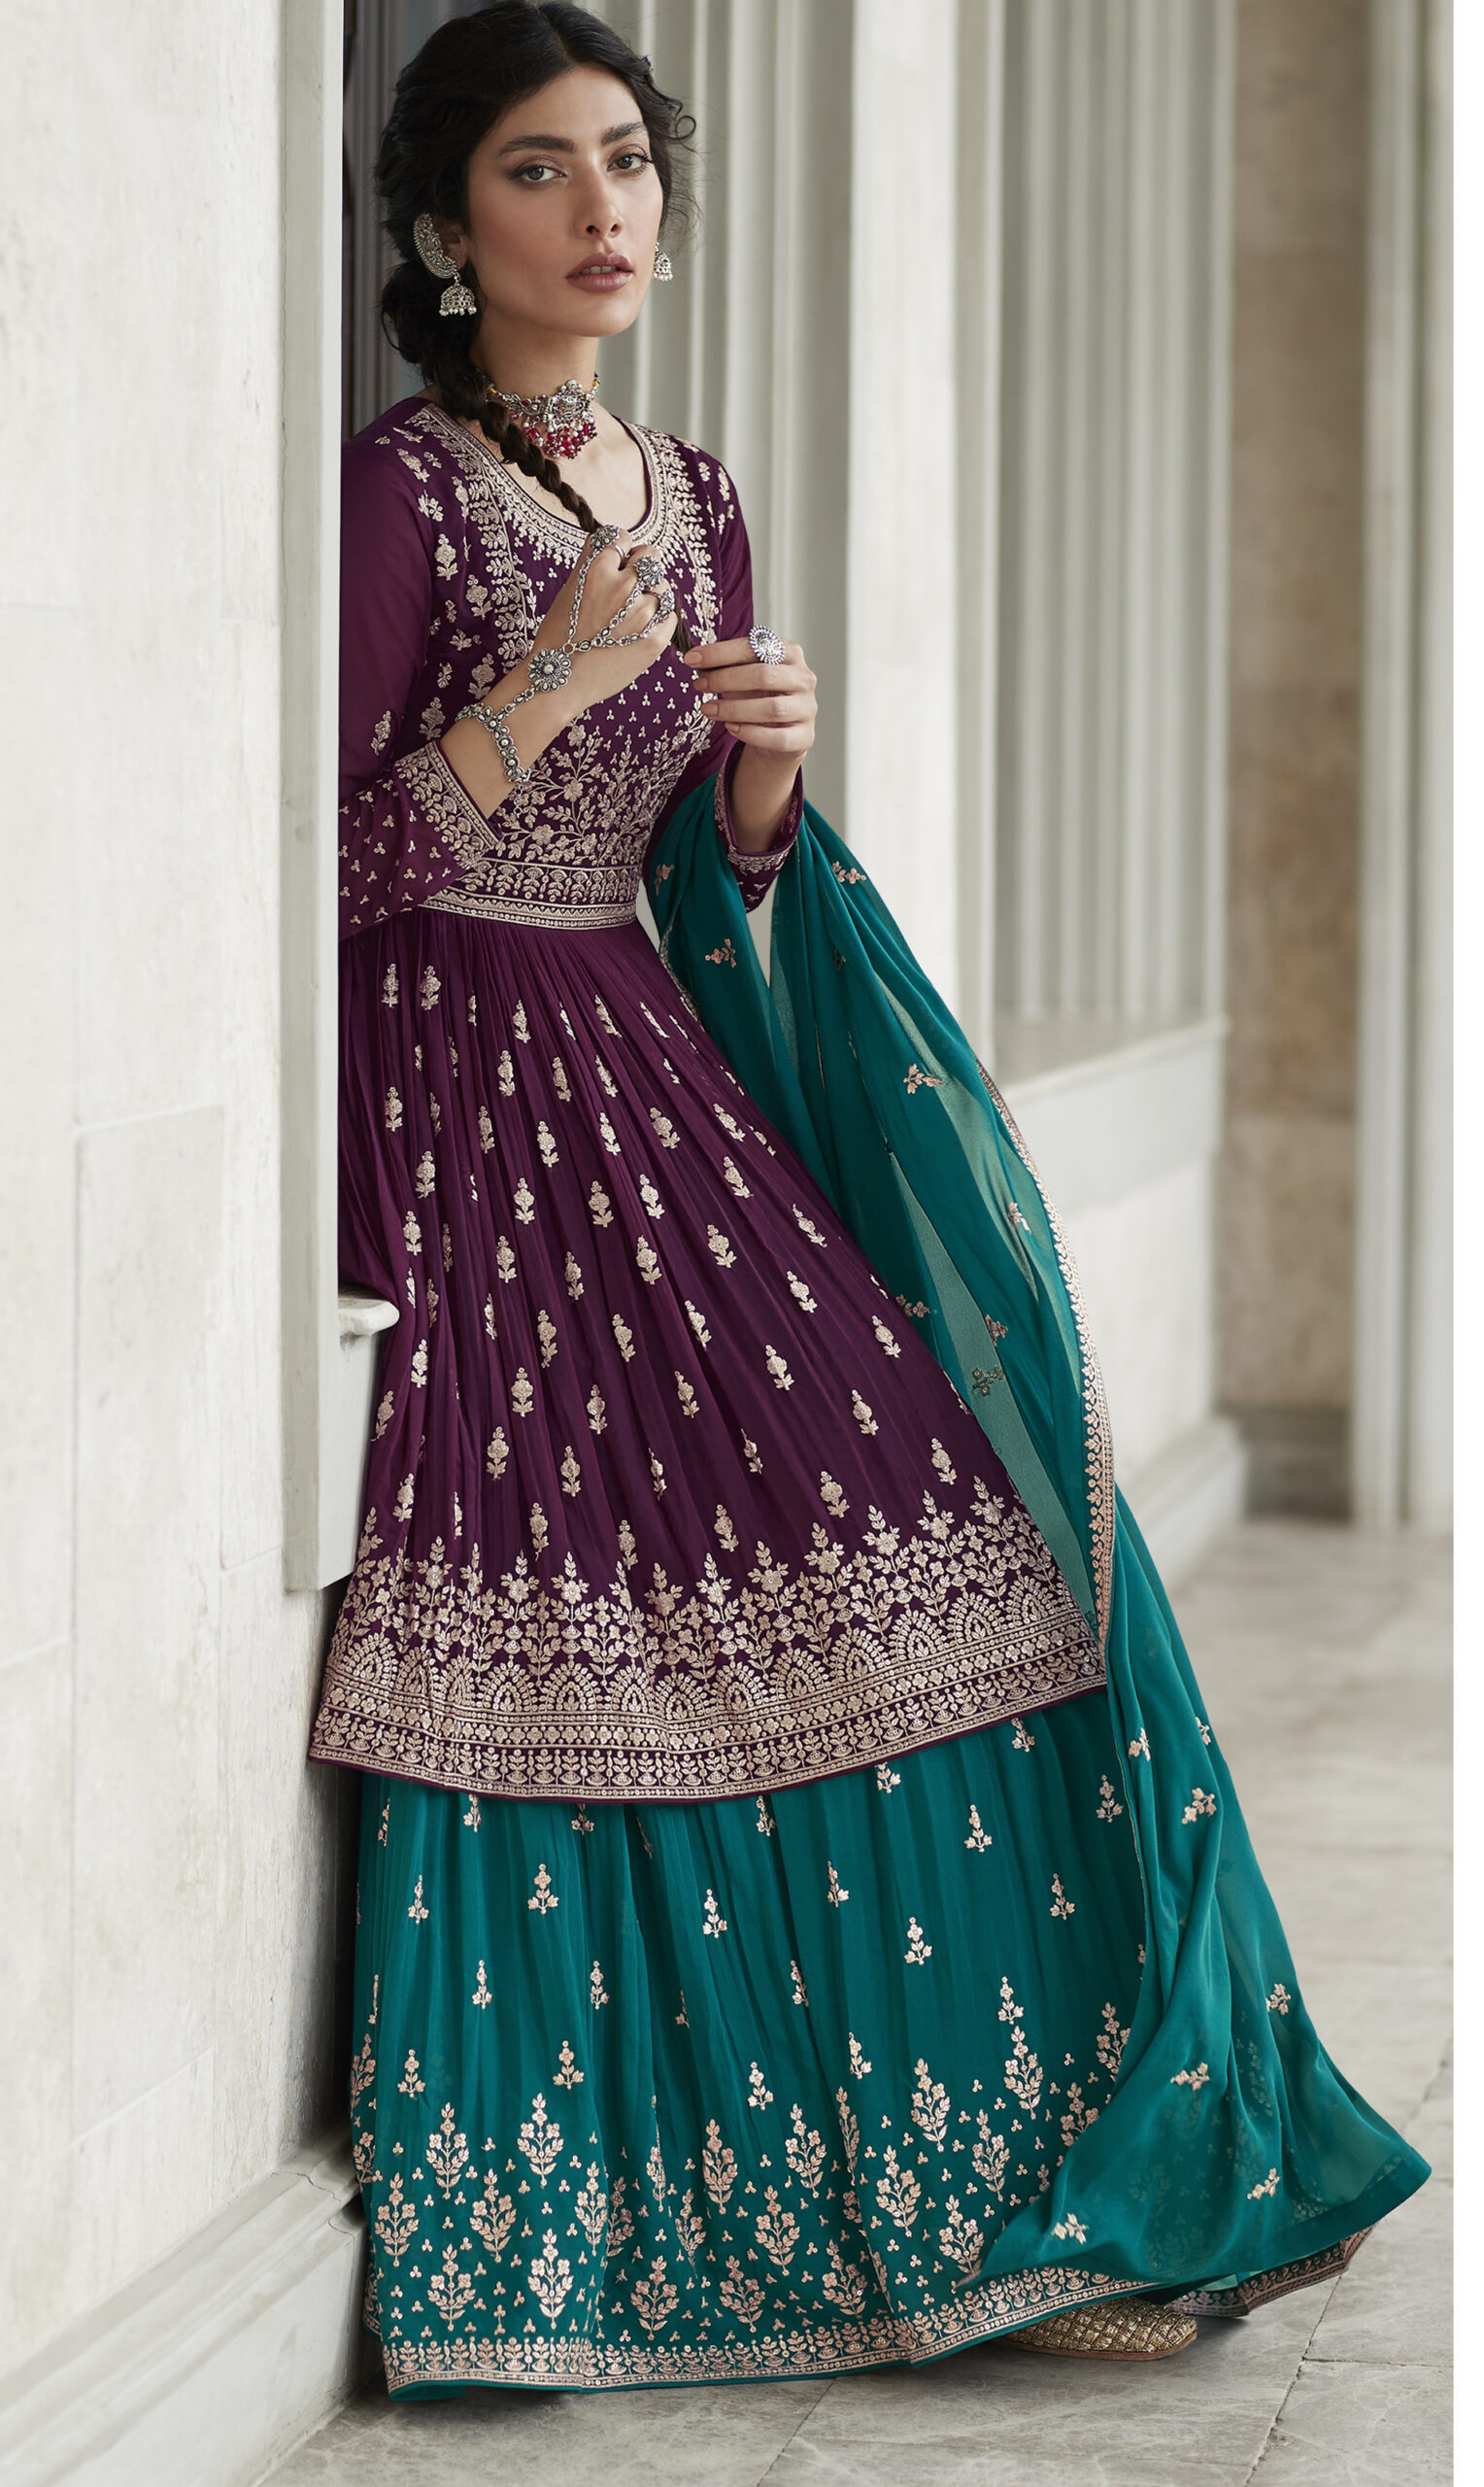 Popular Buy online latest Indian ethnic outfits like Sarees, Salwar Suits,  Lehenga Cholis and Gowns